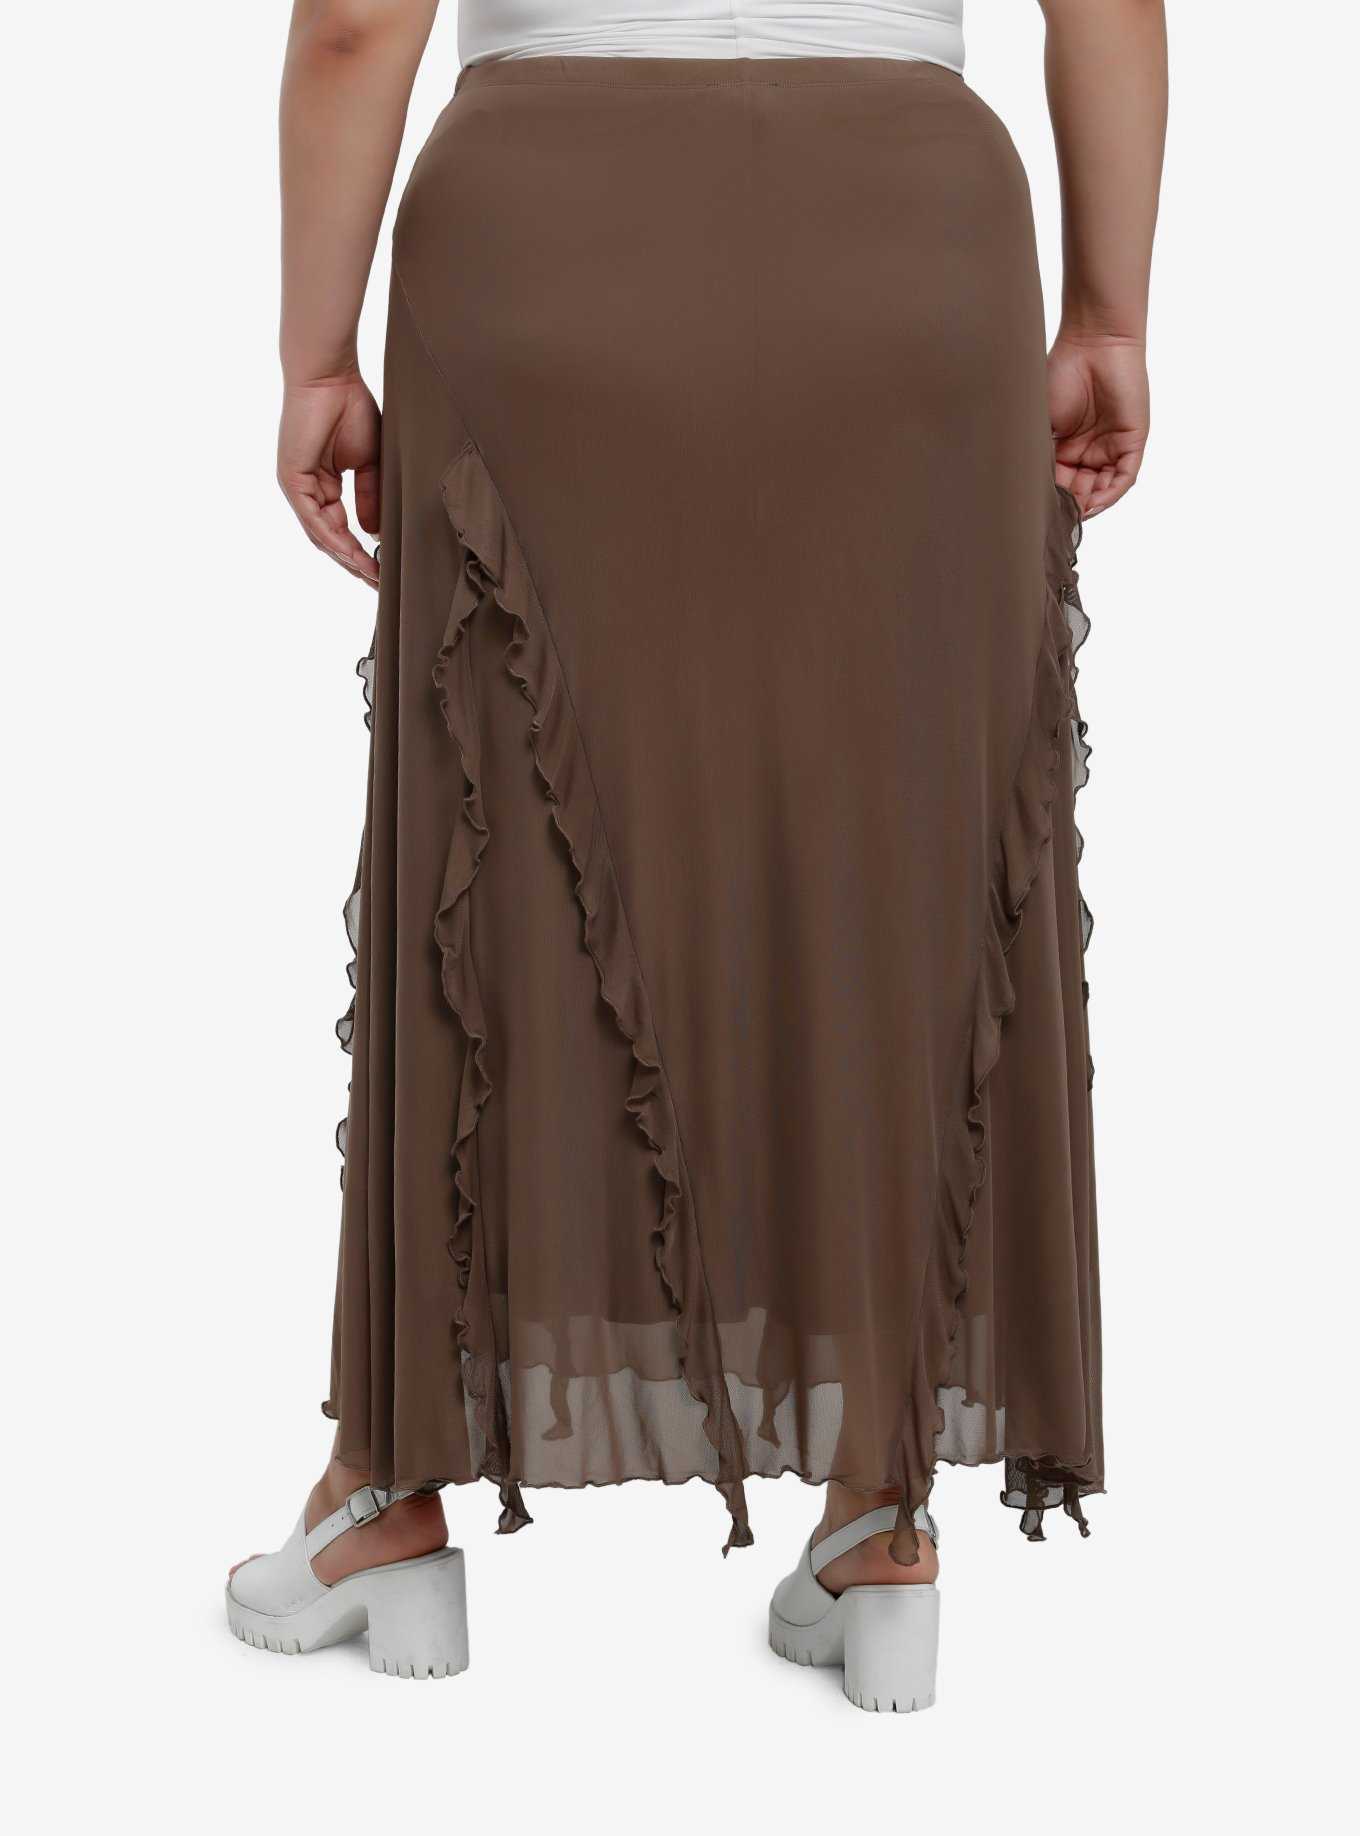 Thorn & Fable Brown Ruffle Maxi Skirt Plus Size, , hi-res